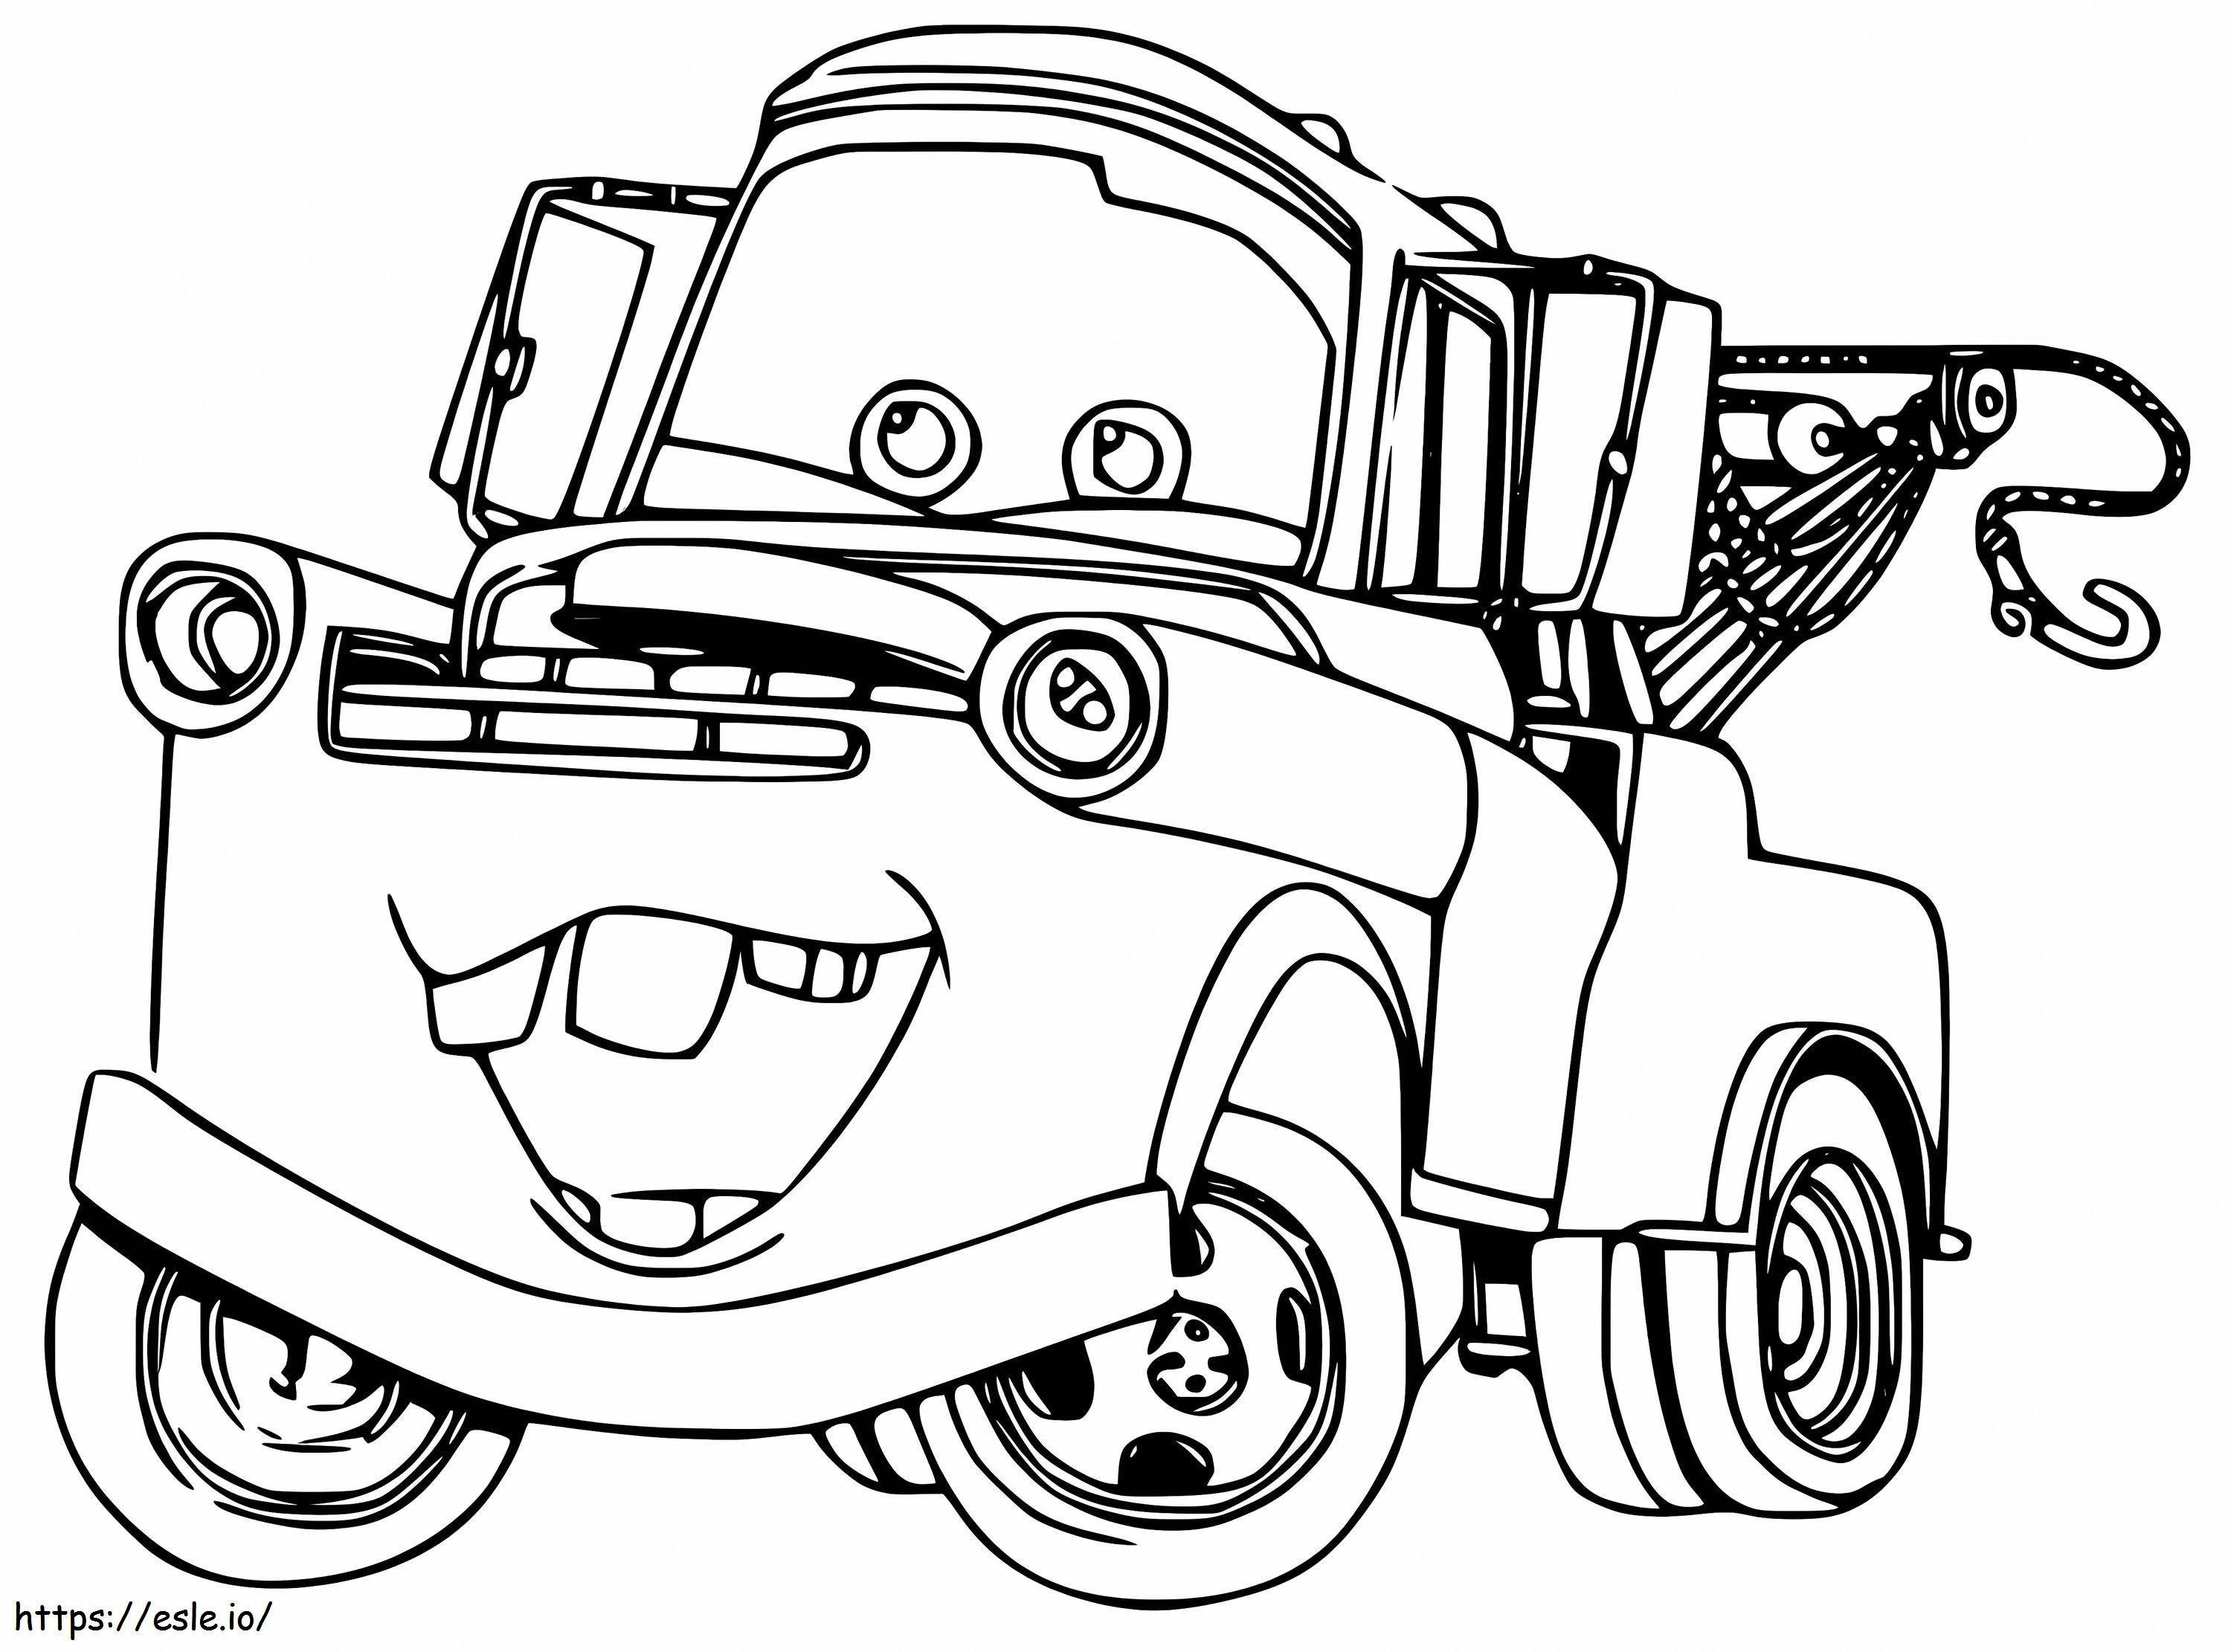 Tow Mater From Disney Cars coloring page